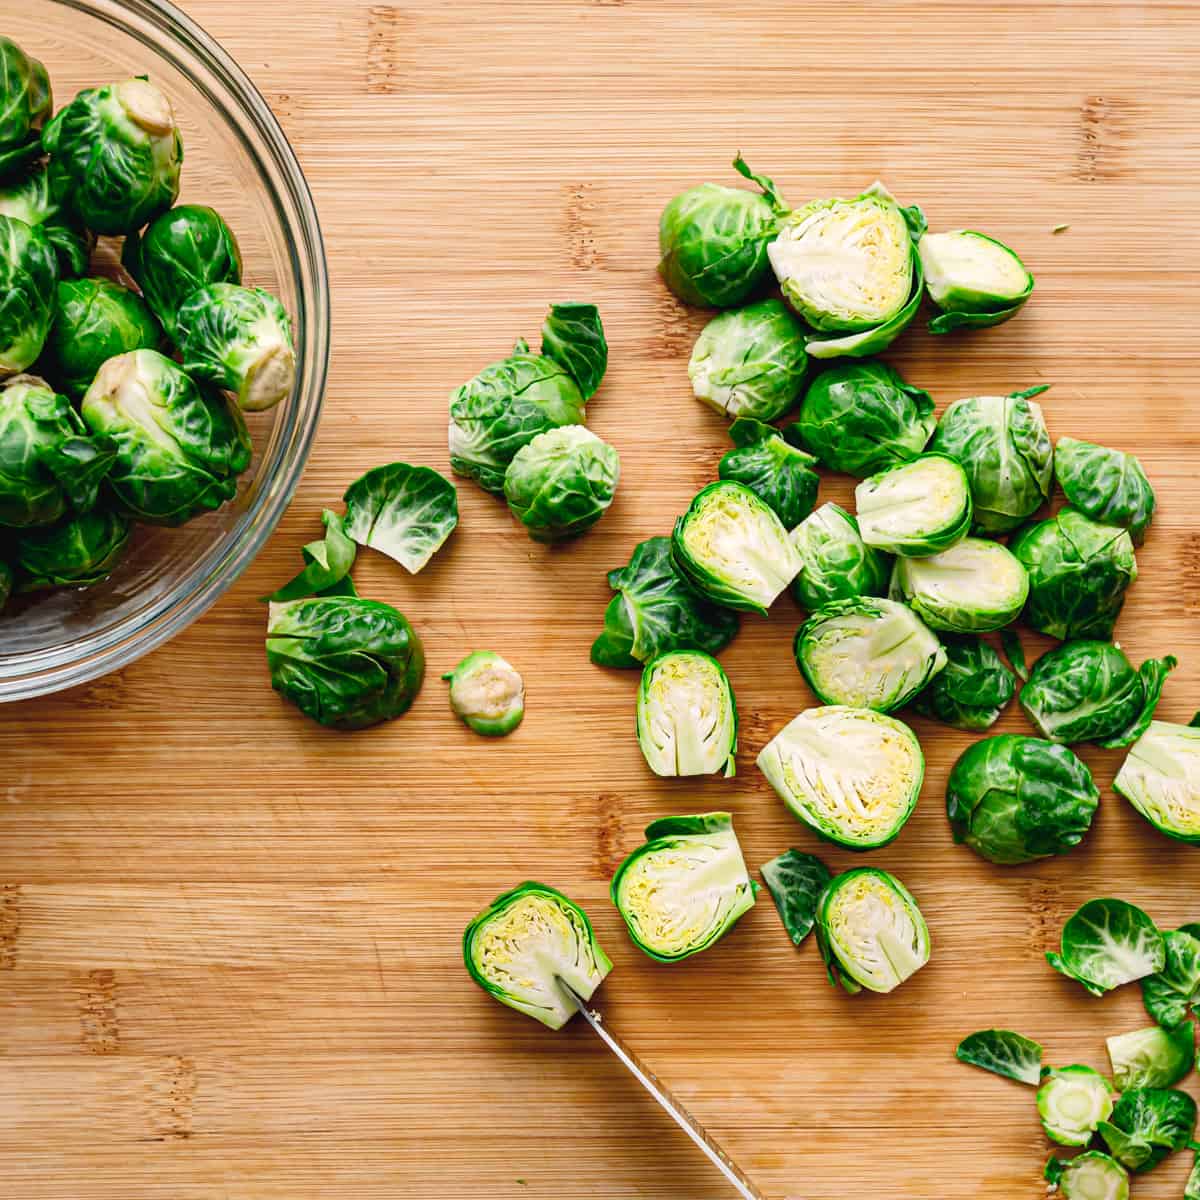 How to Prepare Brussels Sprouts